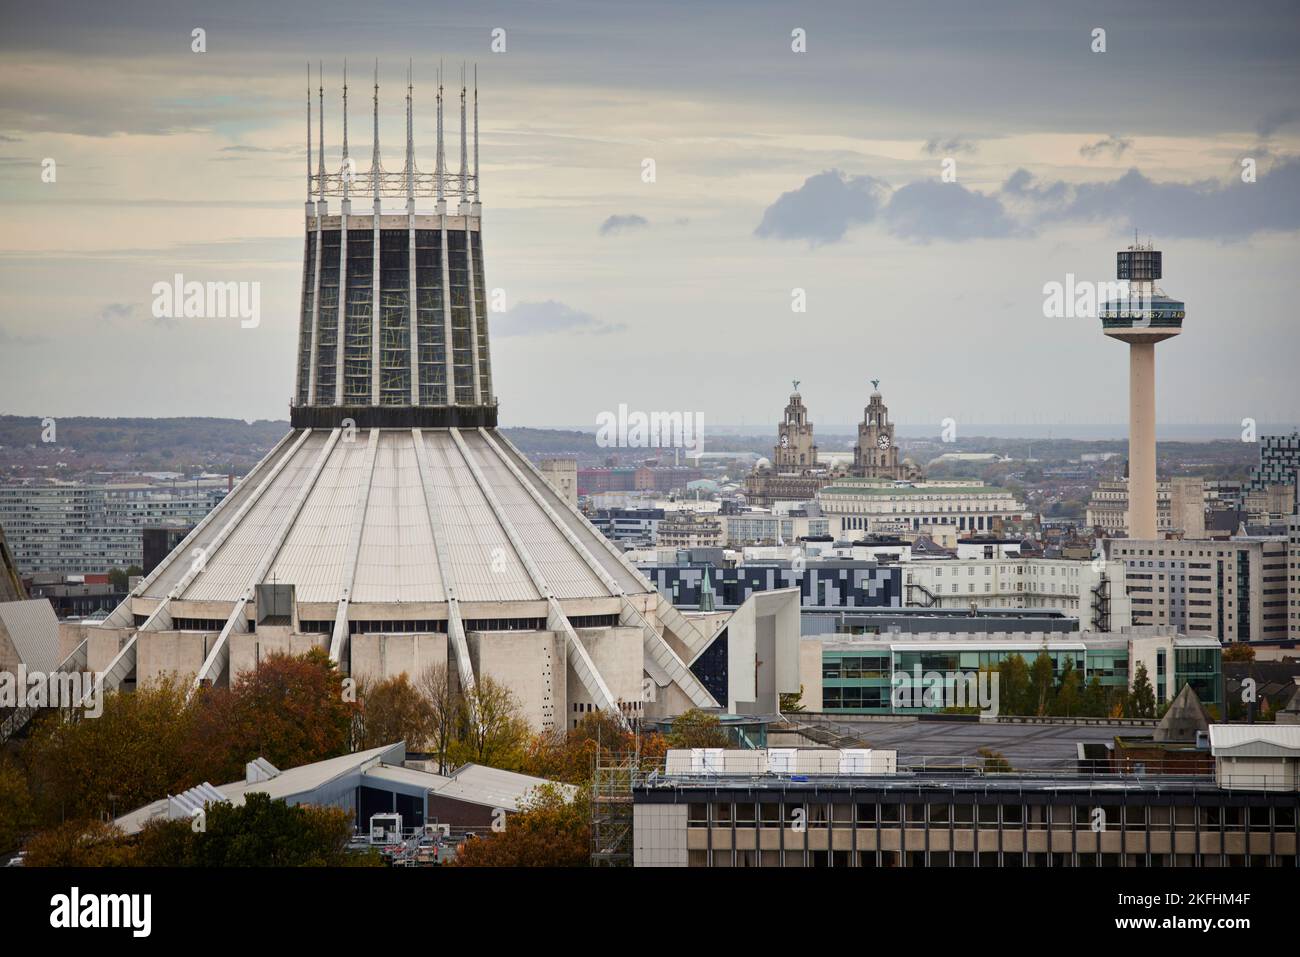 Liverpool Metropolitan Cathedral, officially known as the Metropolitan Cathedral of Christ the King[2] and locally nicknamed 'Paddy's Wigwam' Stock Photo